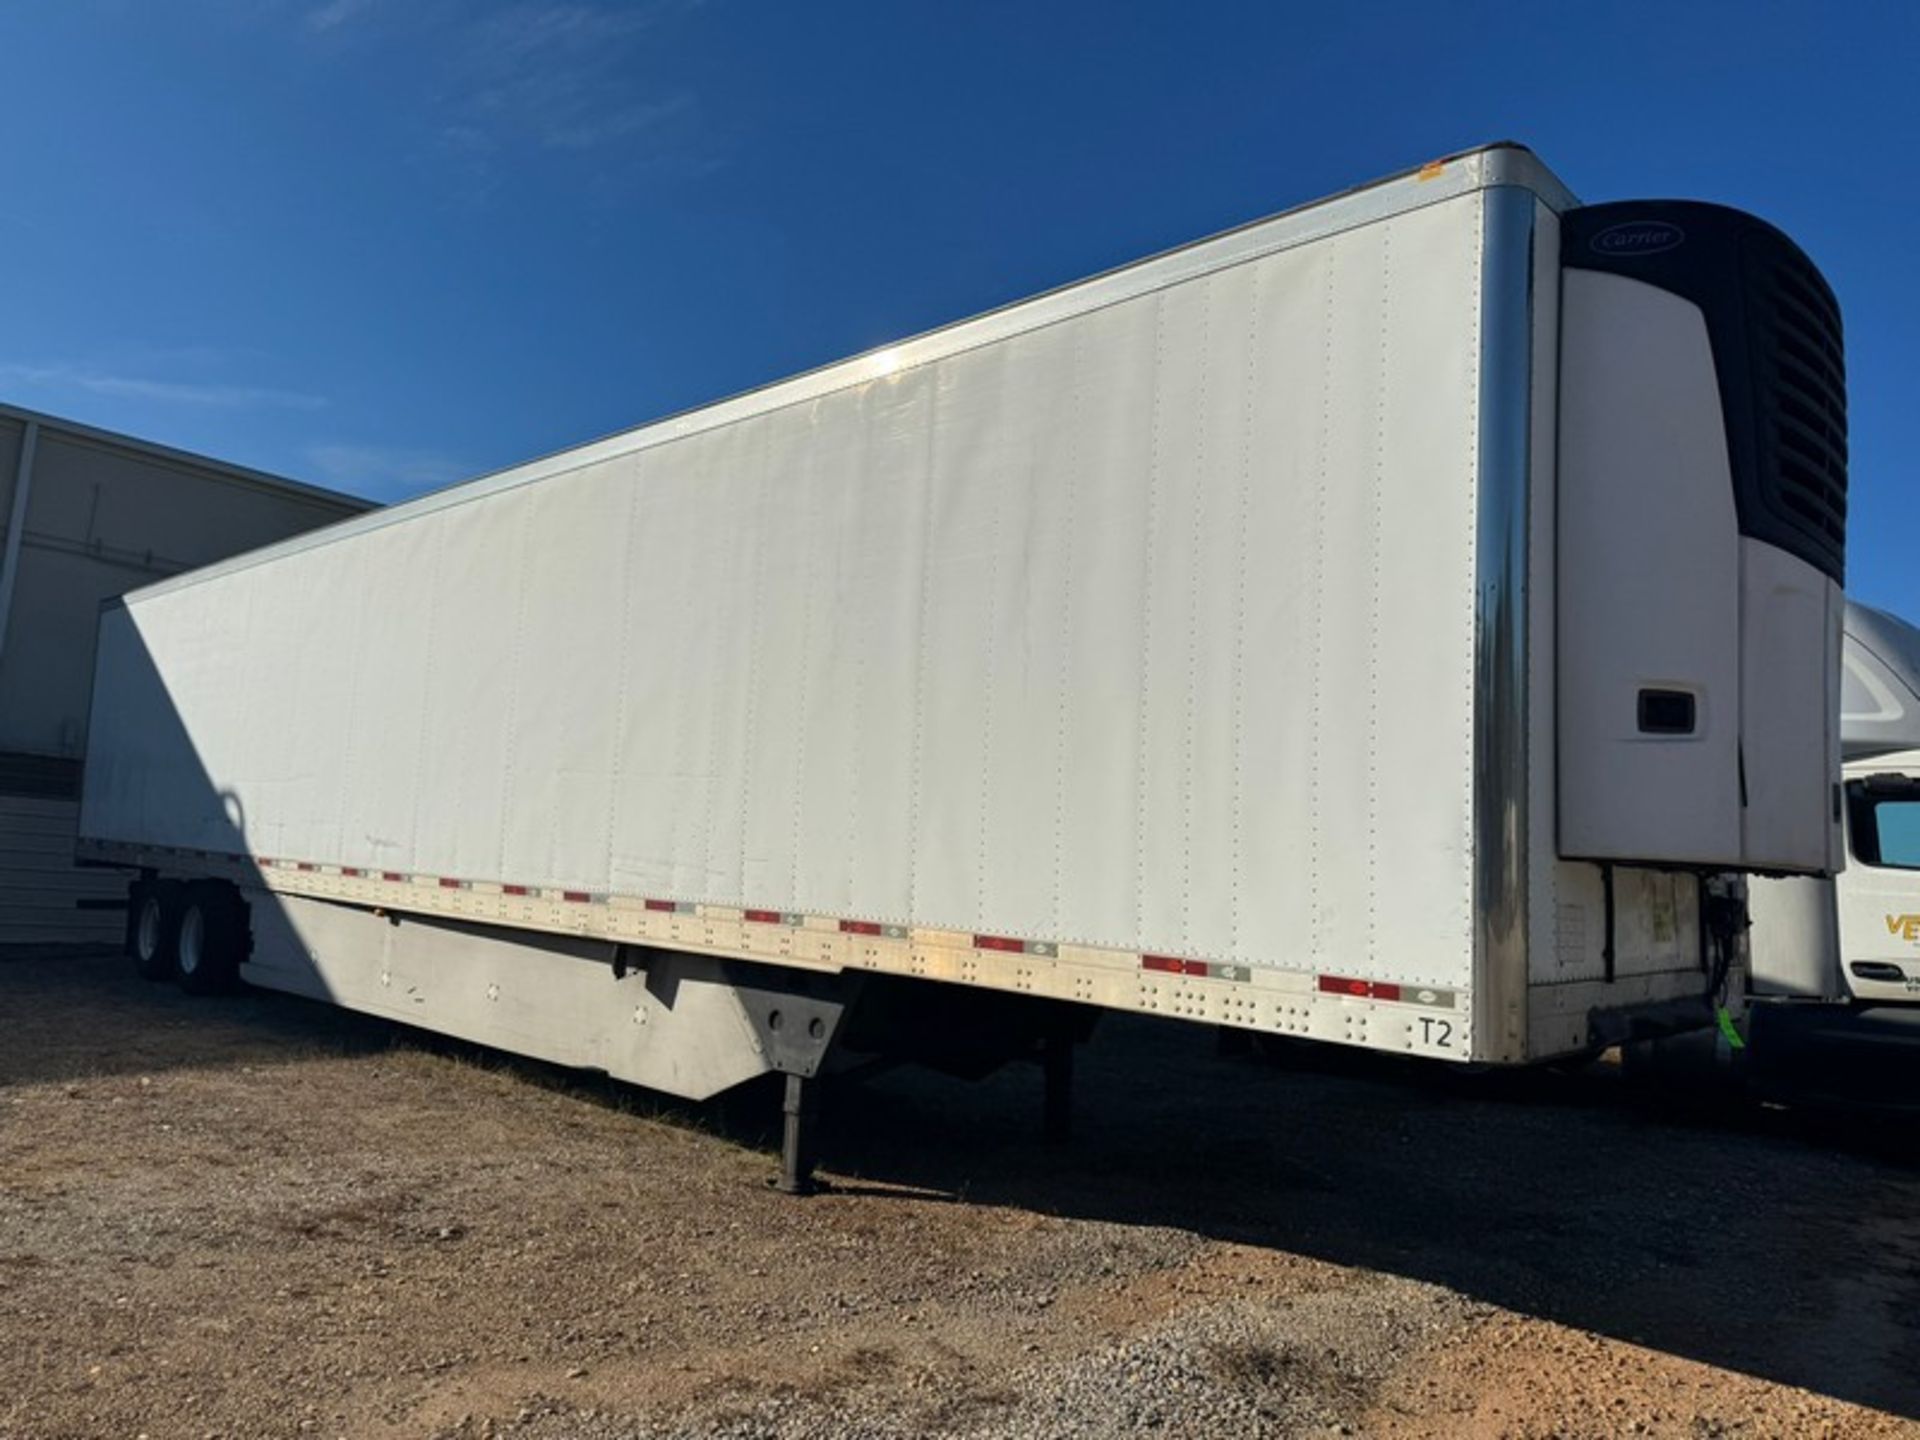 2012 UTILITY Trailer, VIN# IUY VS2536 DM4917 23 VS2RA, with Carrier Refrigeration Unit - Image 2 of 13